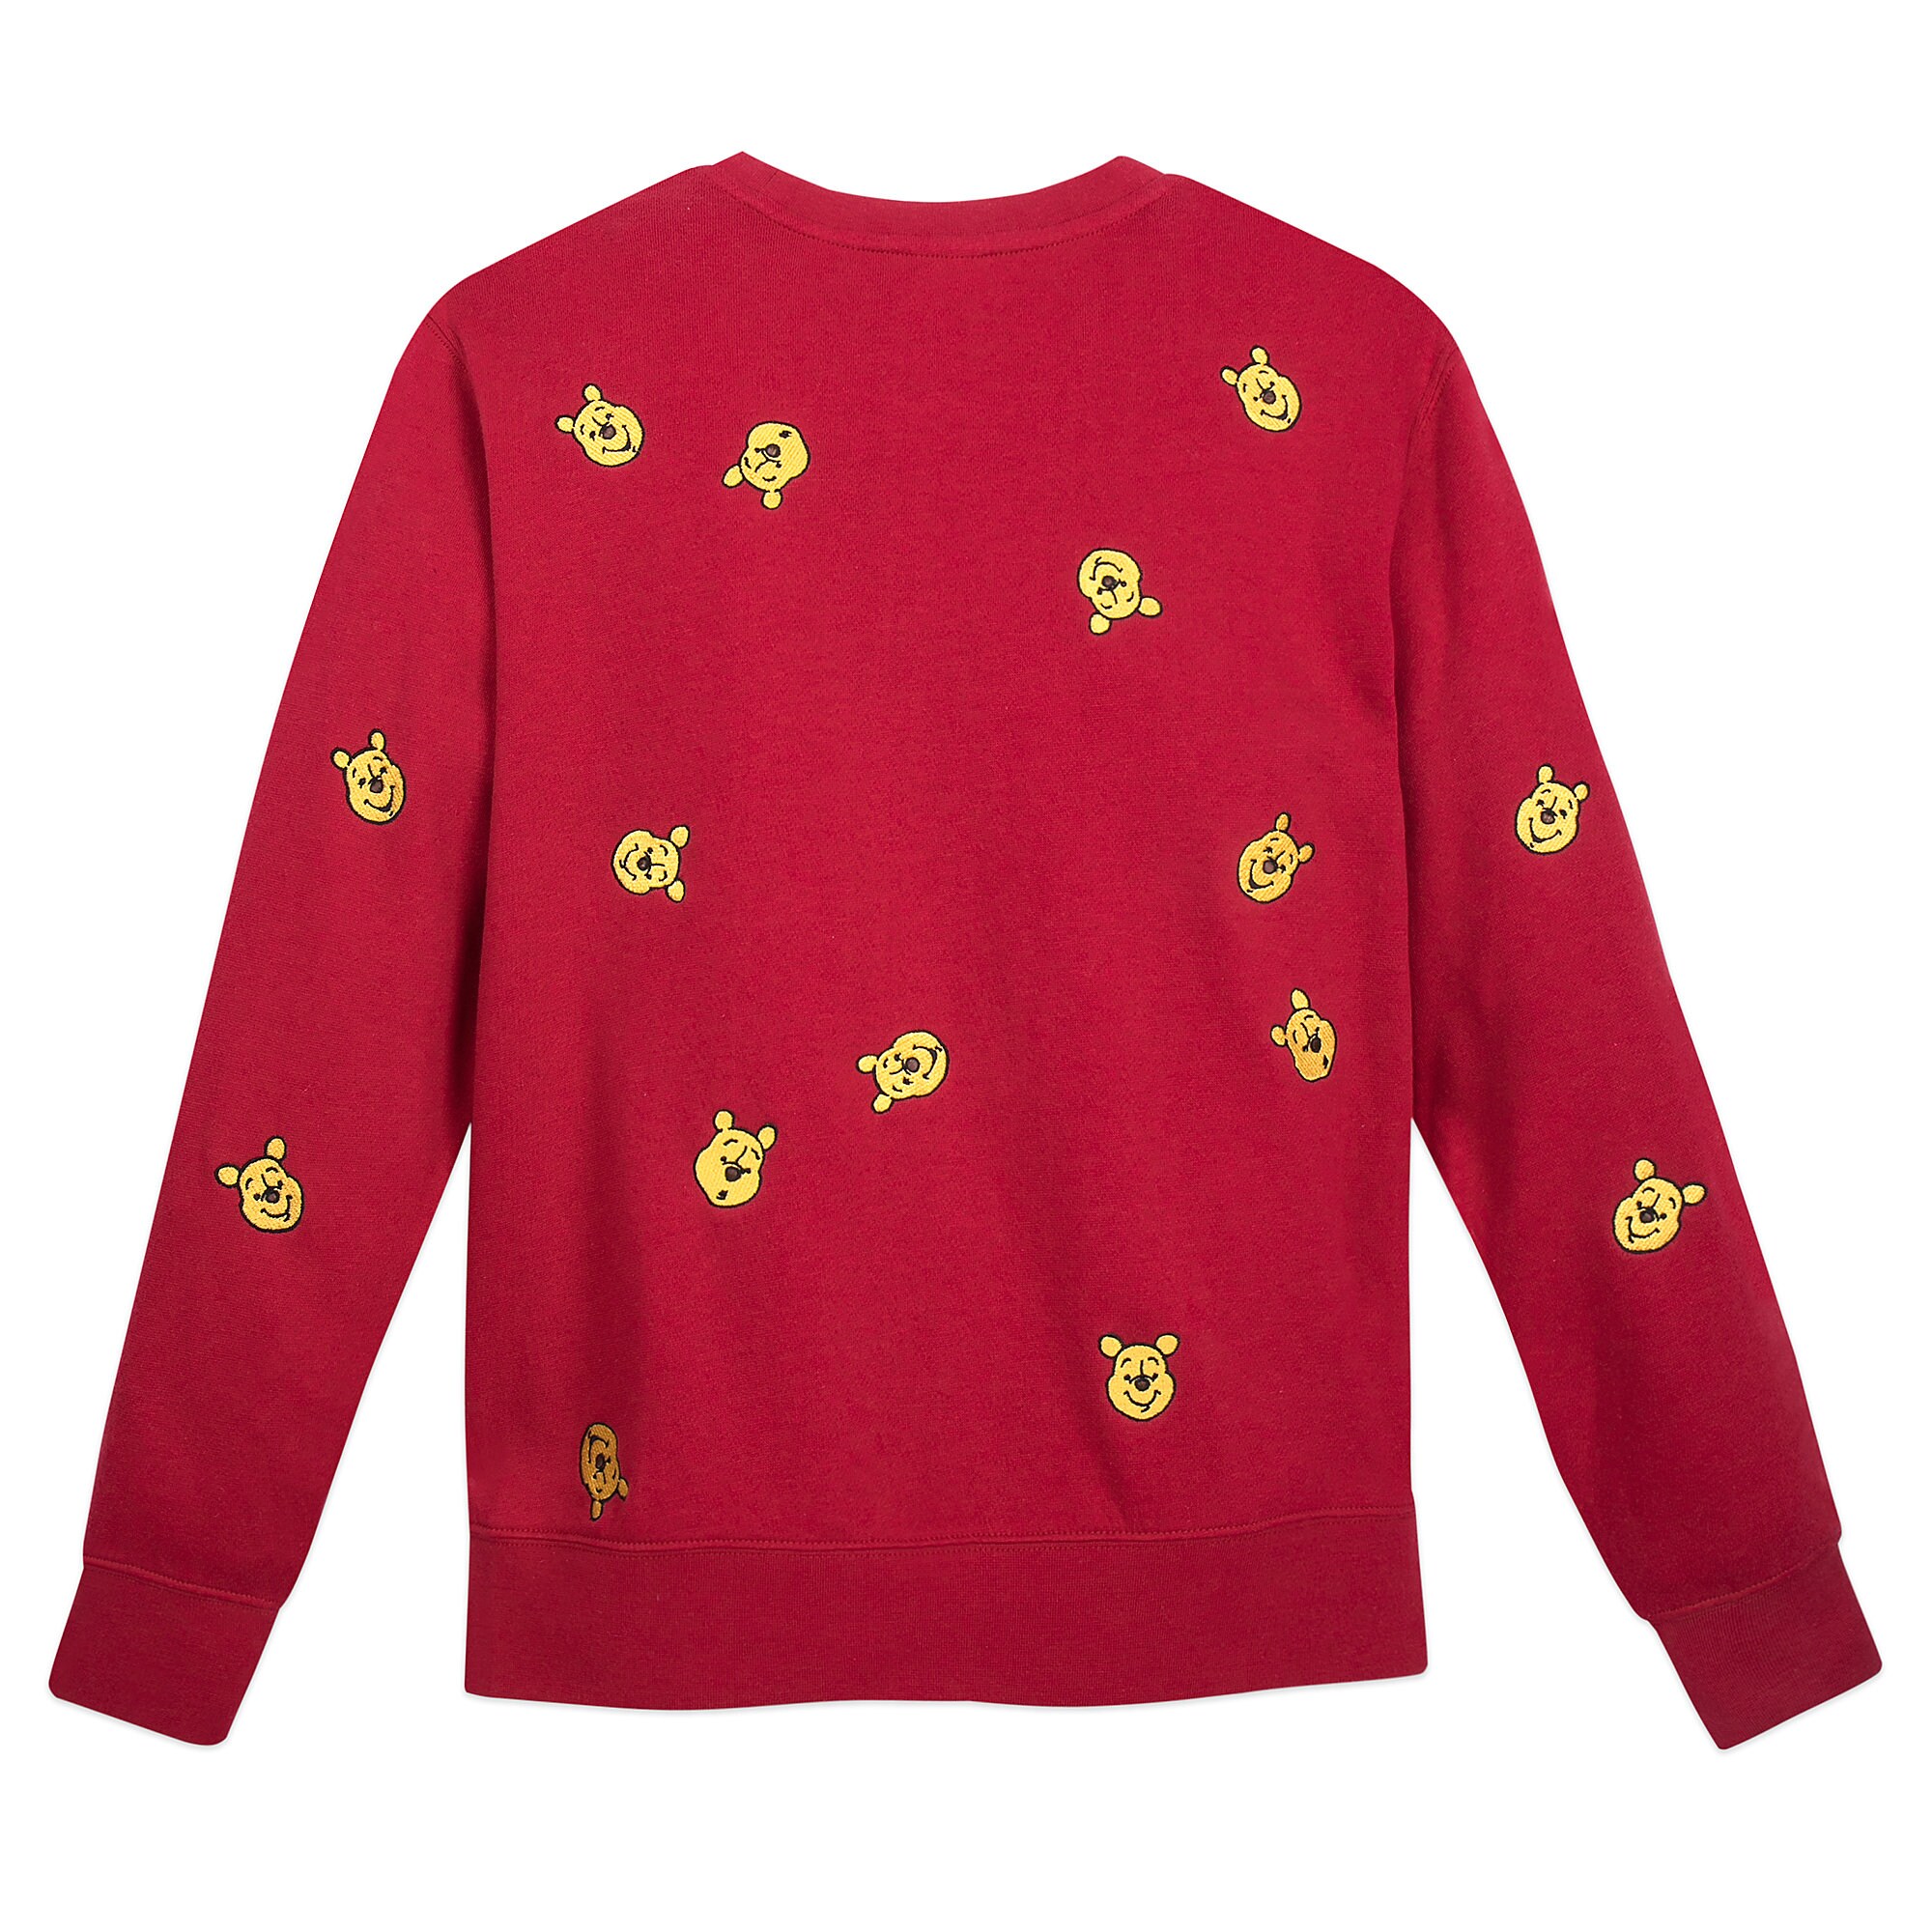 Winnie the Pooh Pullover Sweater for Adults